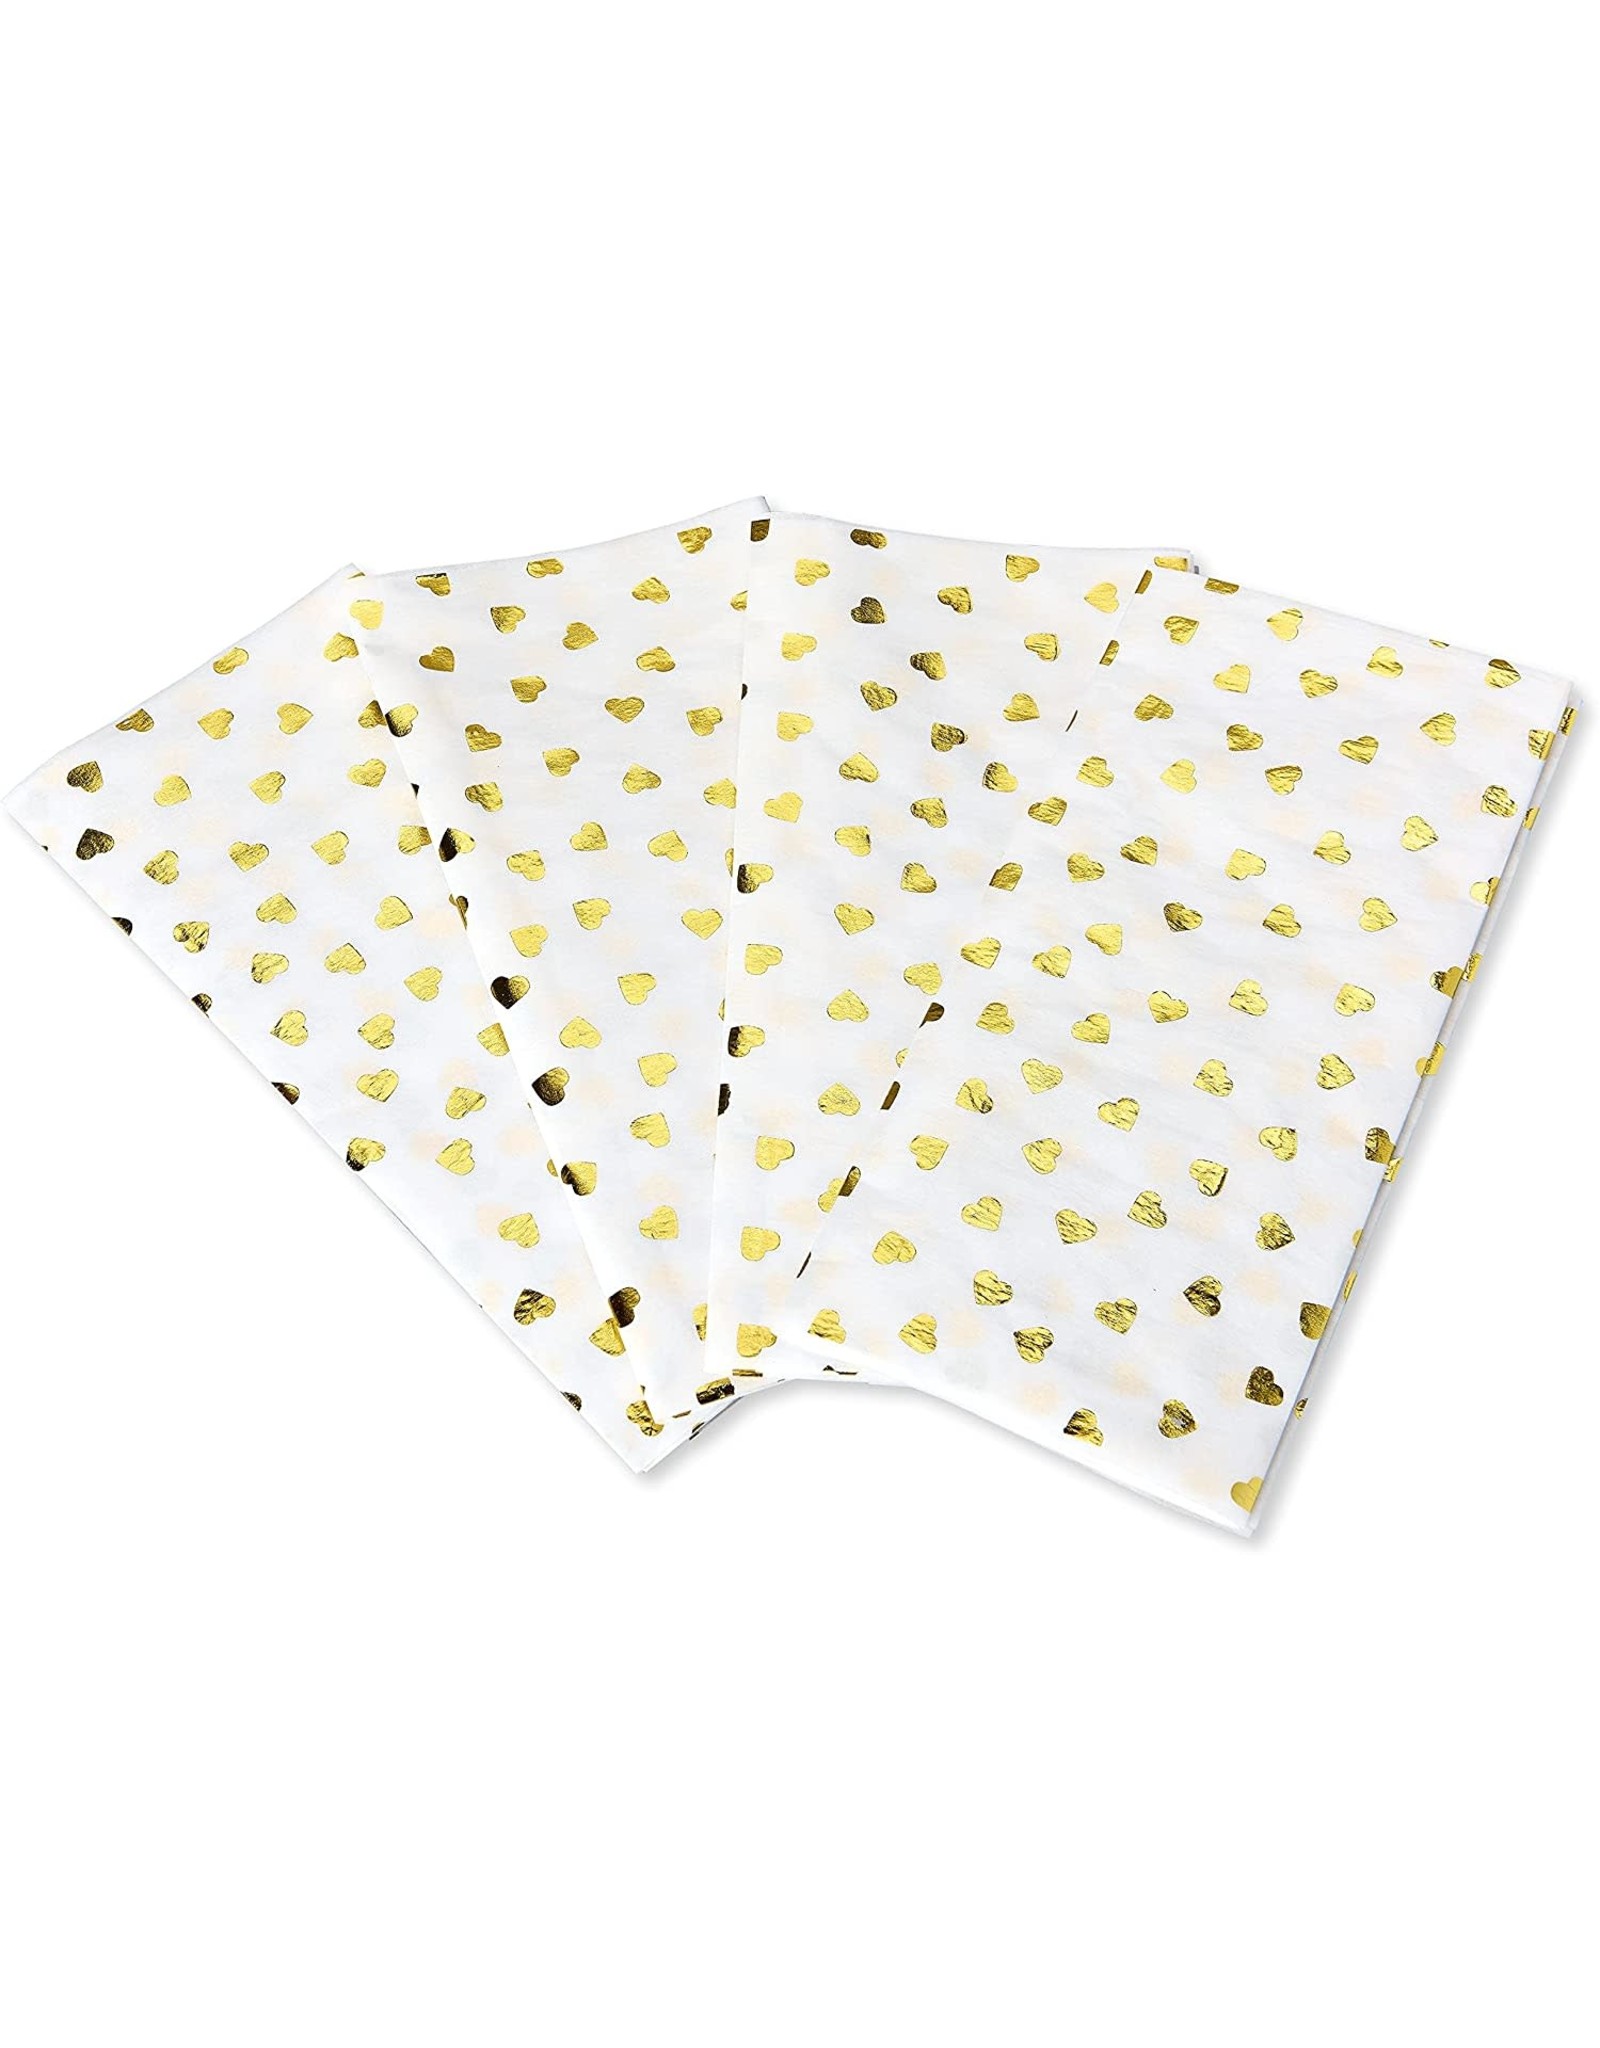 PAPYRUS® Tissue Paper 4 Sheets Gold Foil Hearts On White